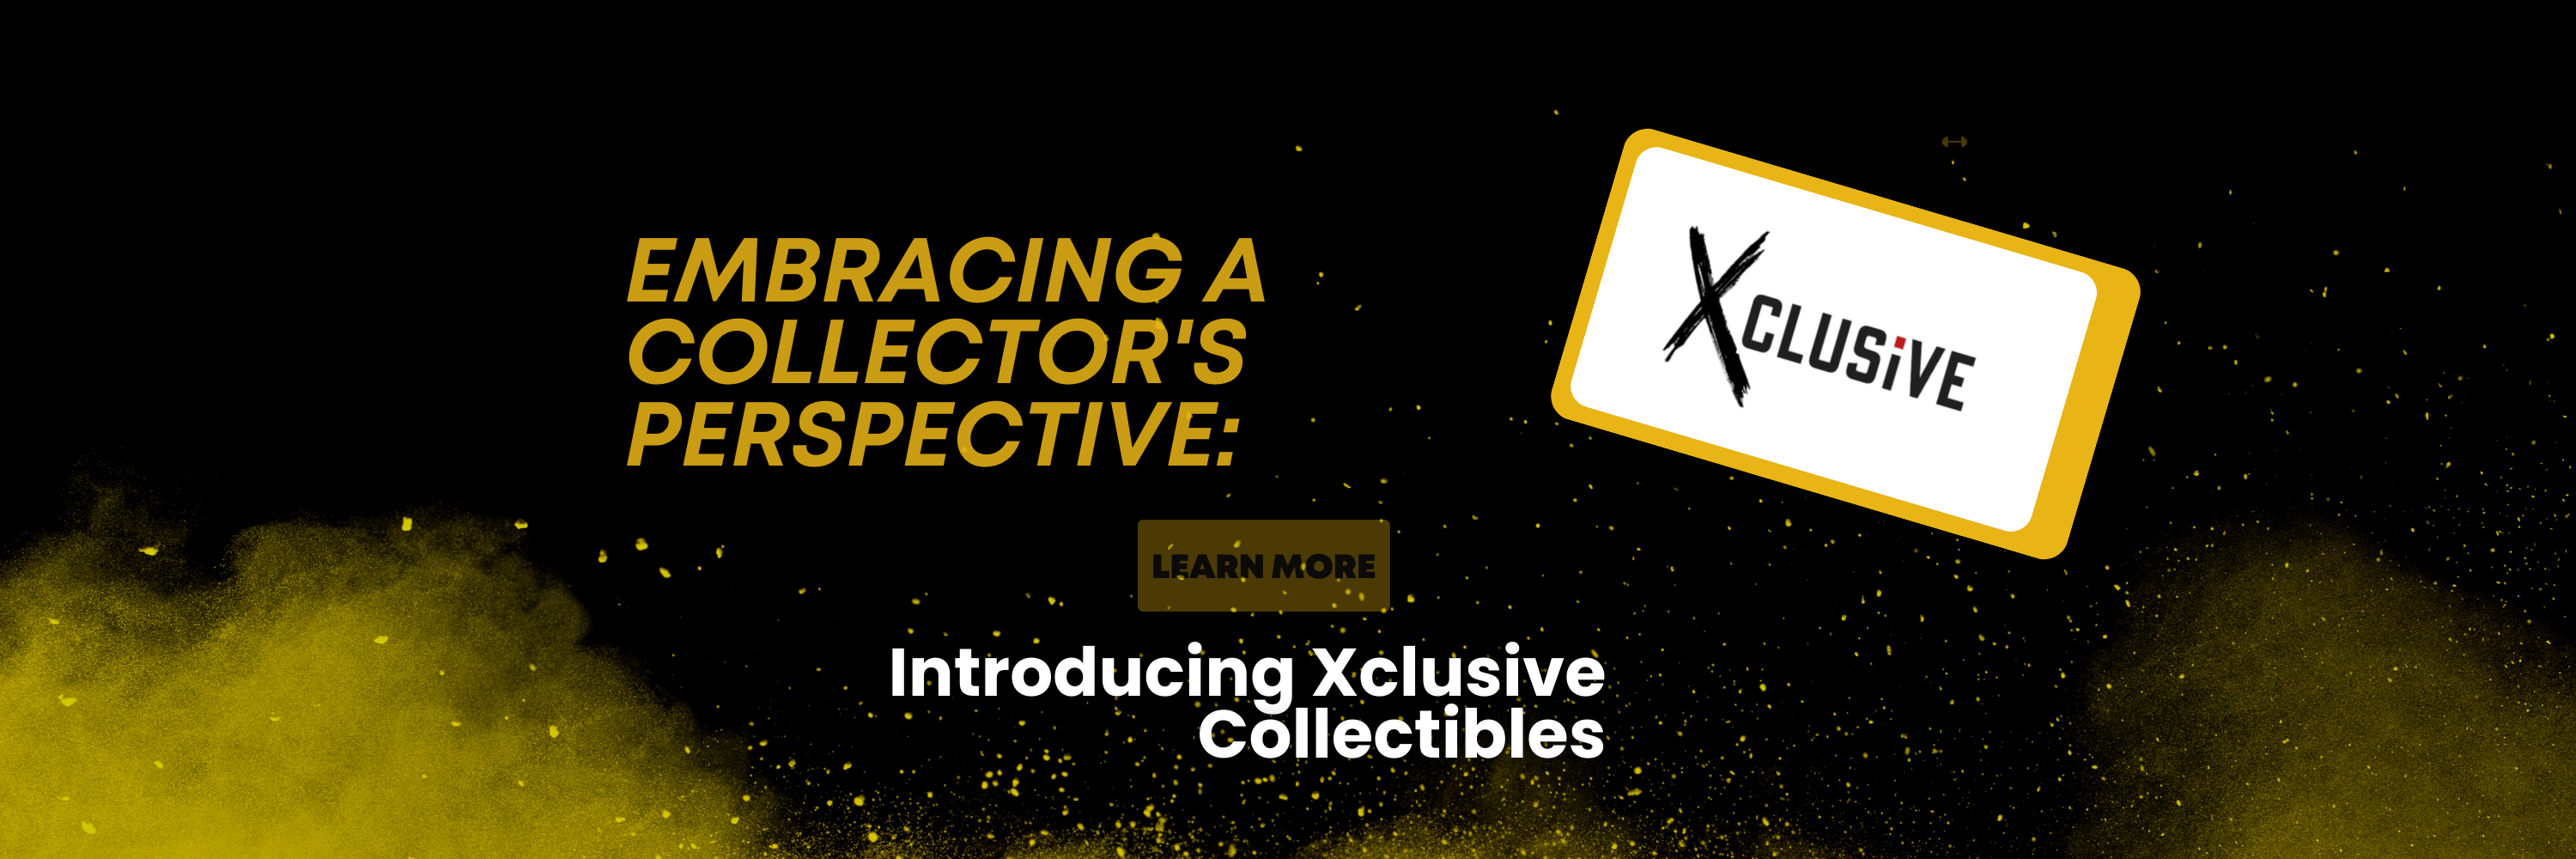 Embracing a Collector's Perspective: Introducing Xclusive Collectibles